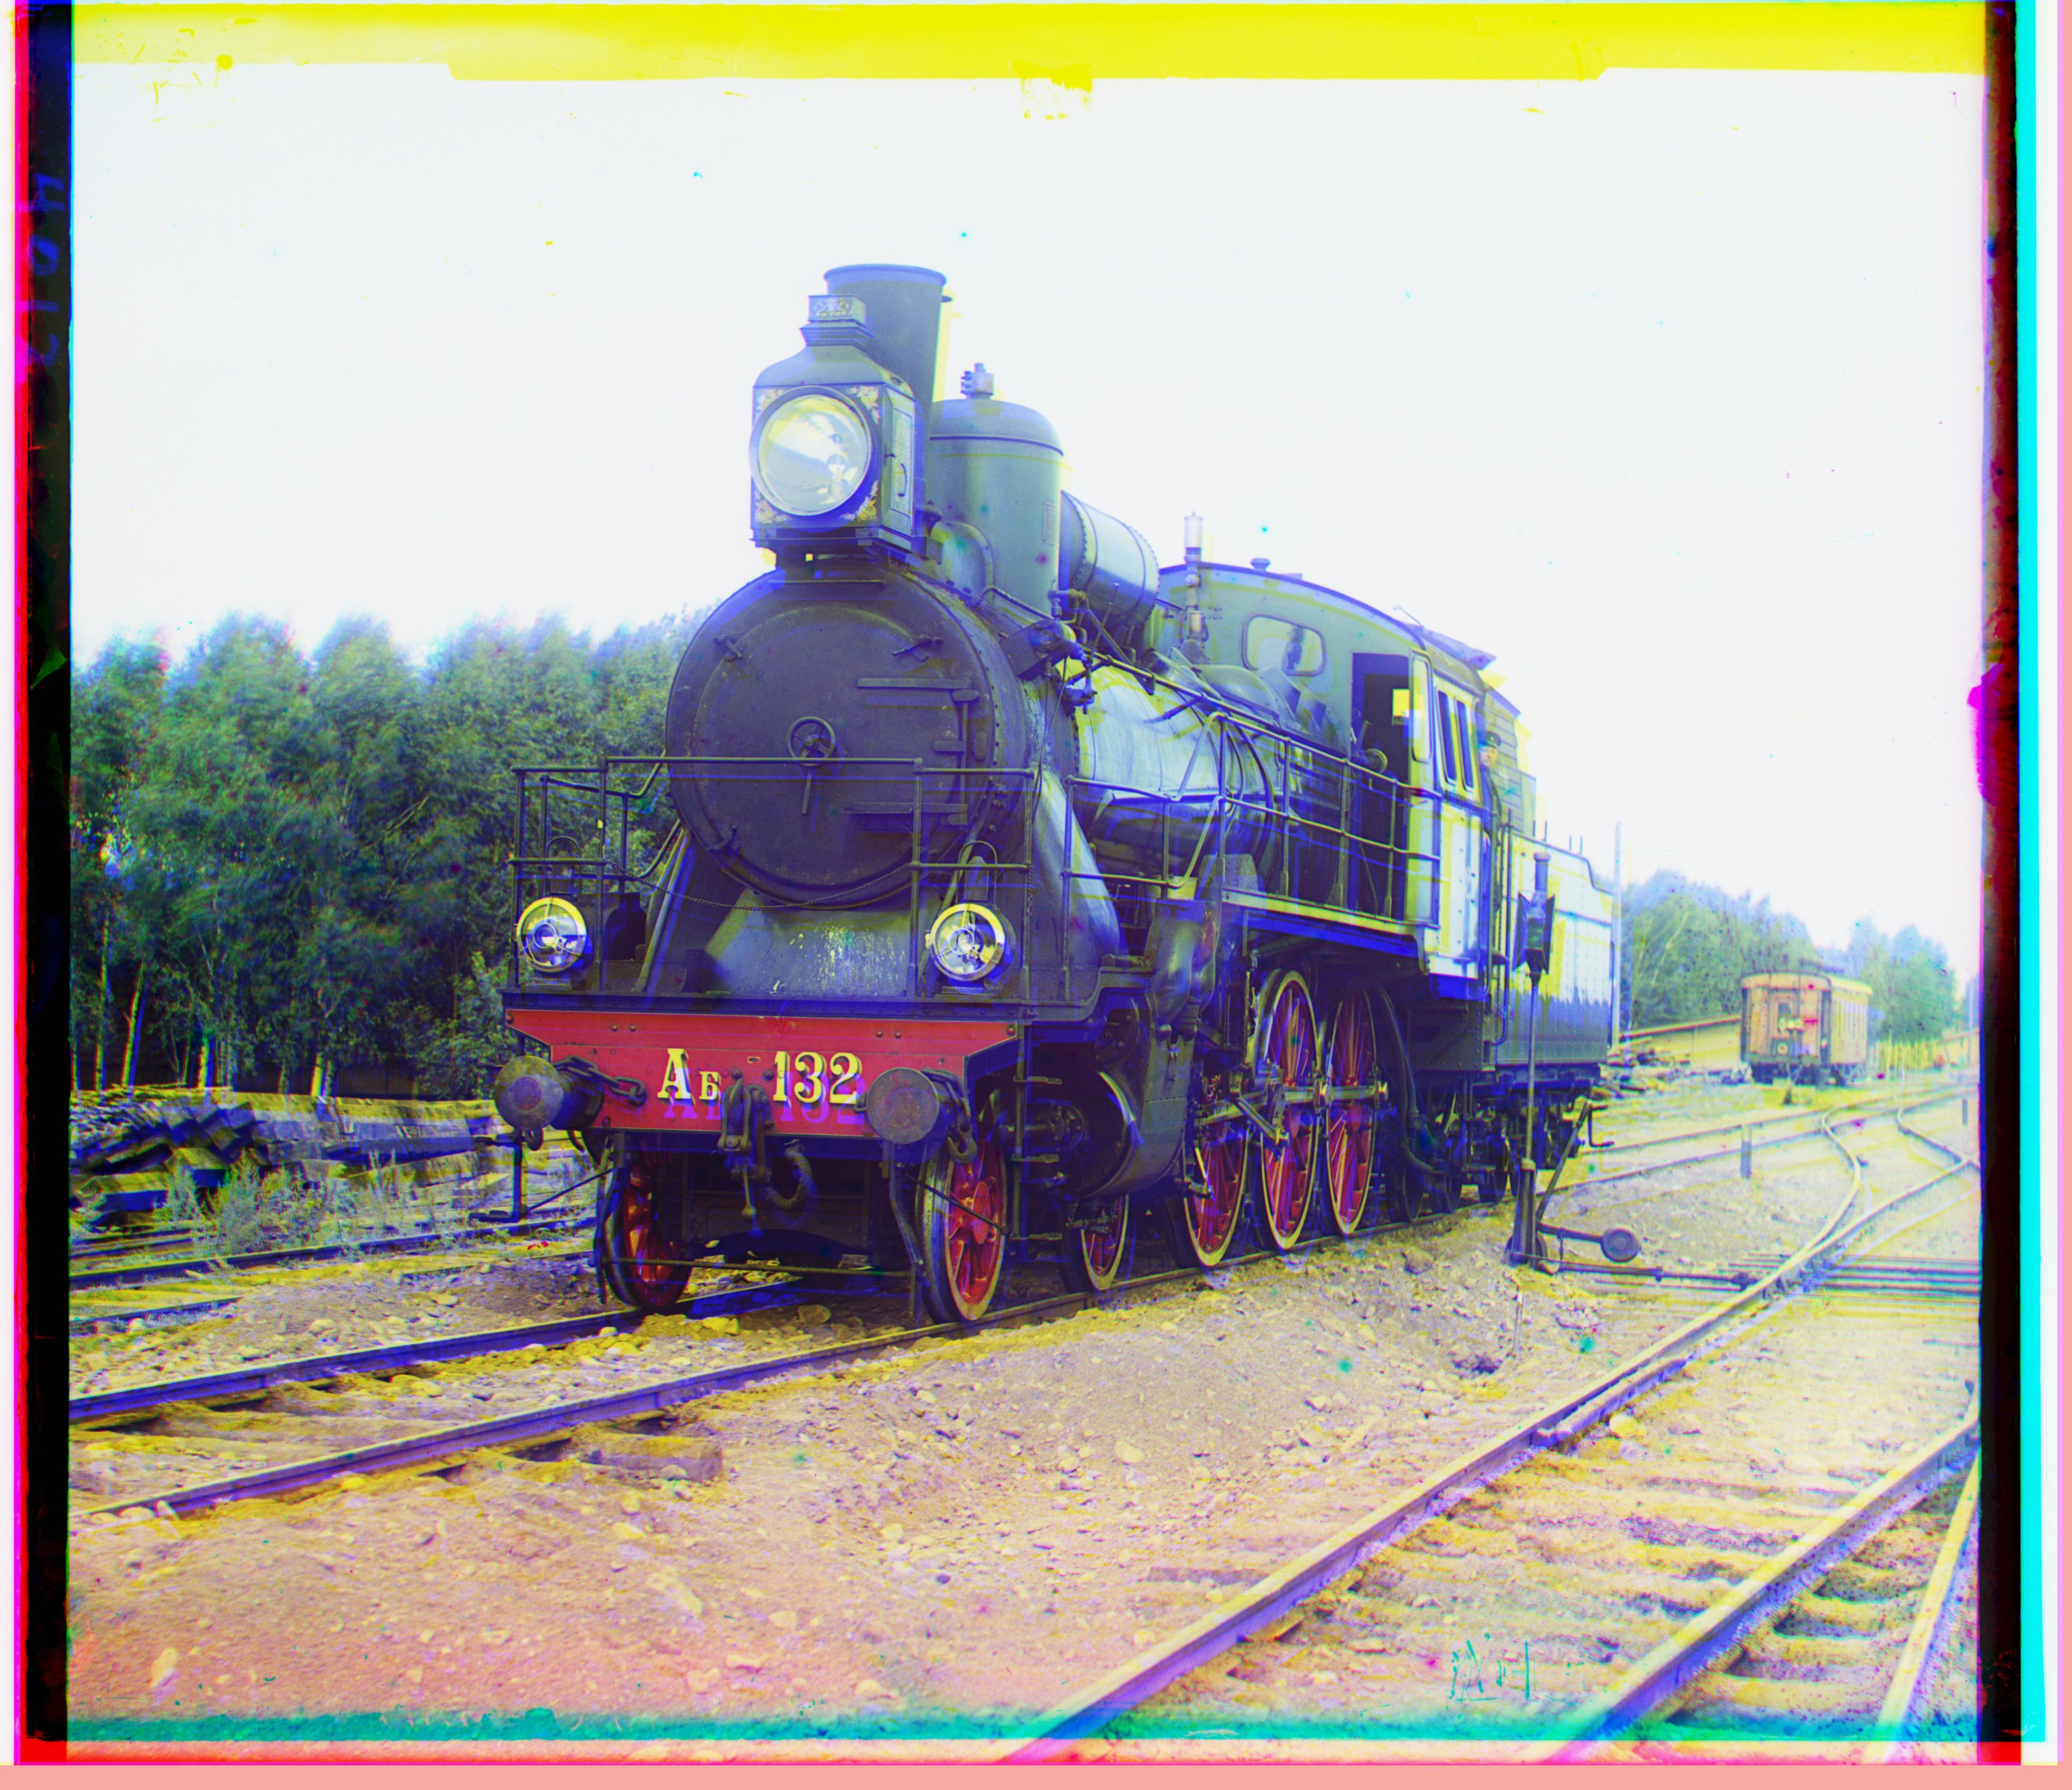 train.tif image using patch based alignment